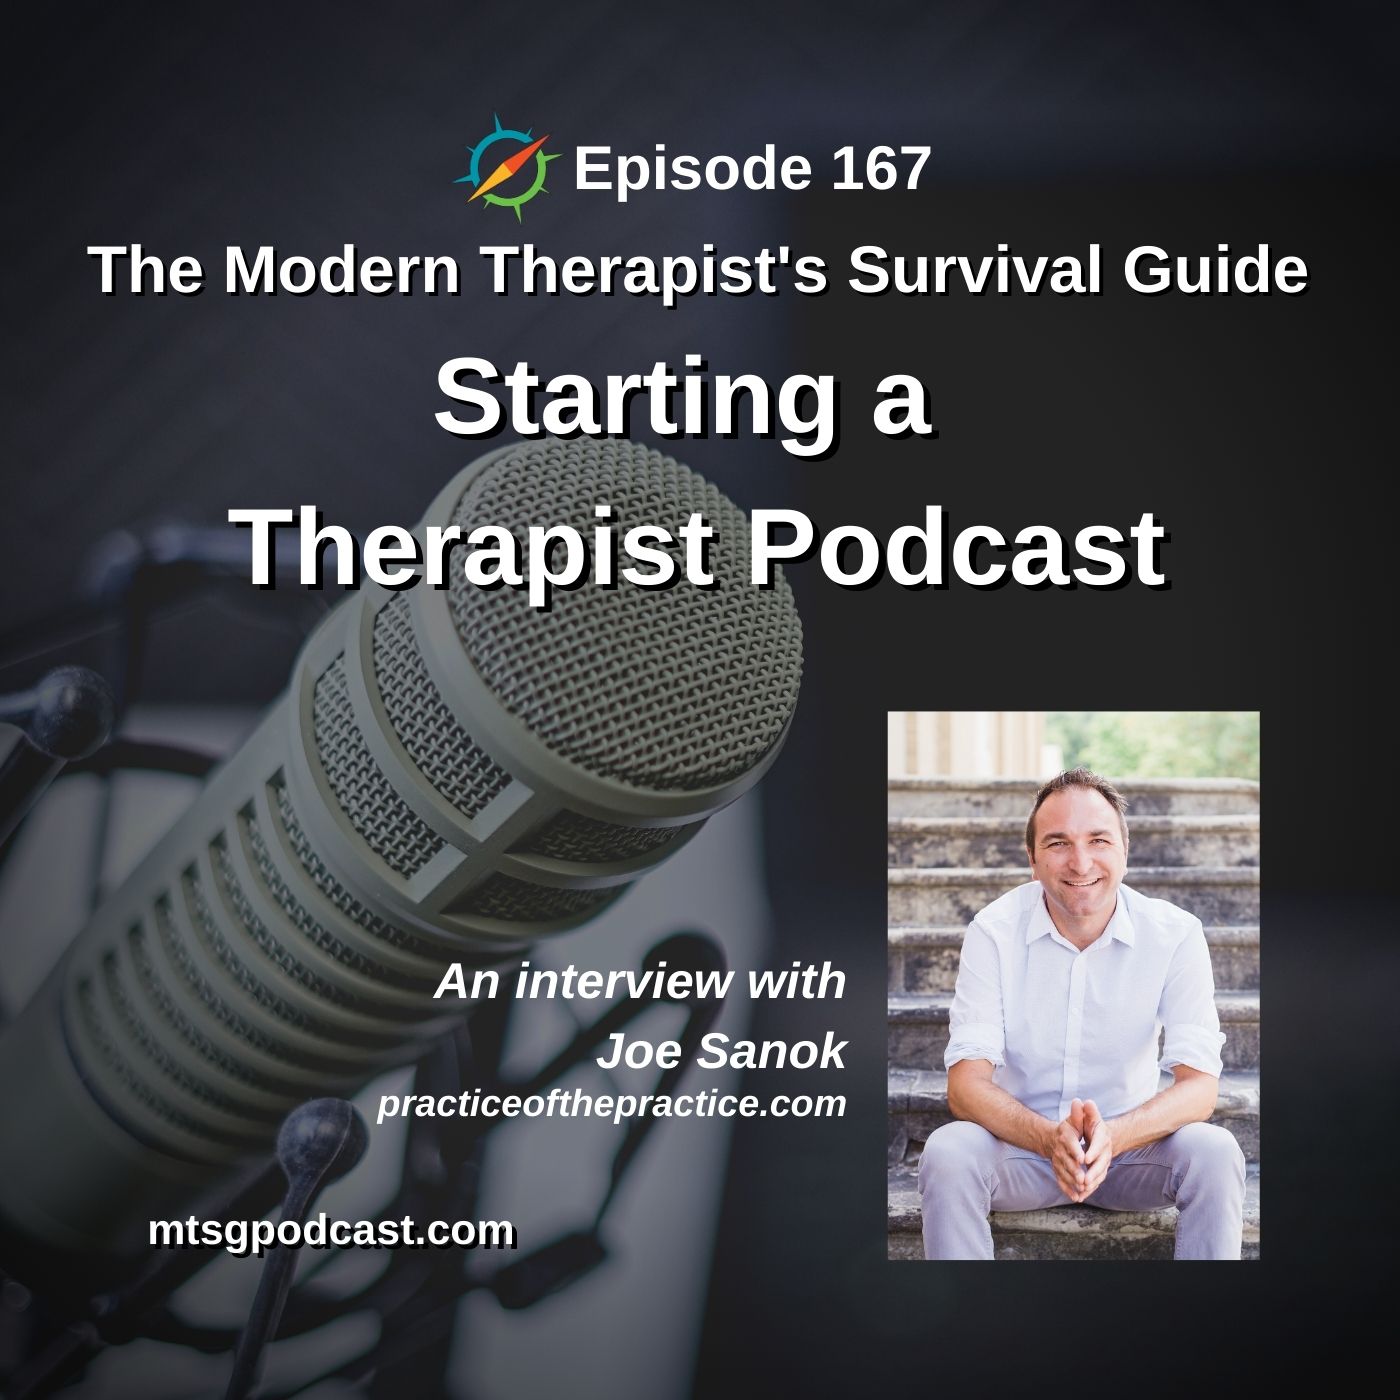 Starting a Therapist Podcast: An interview with Joe Sanok